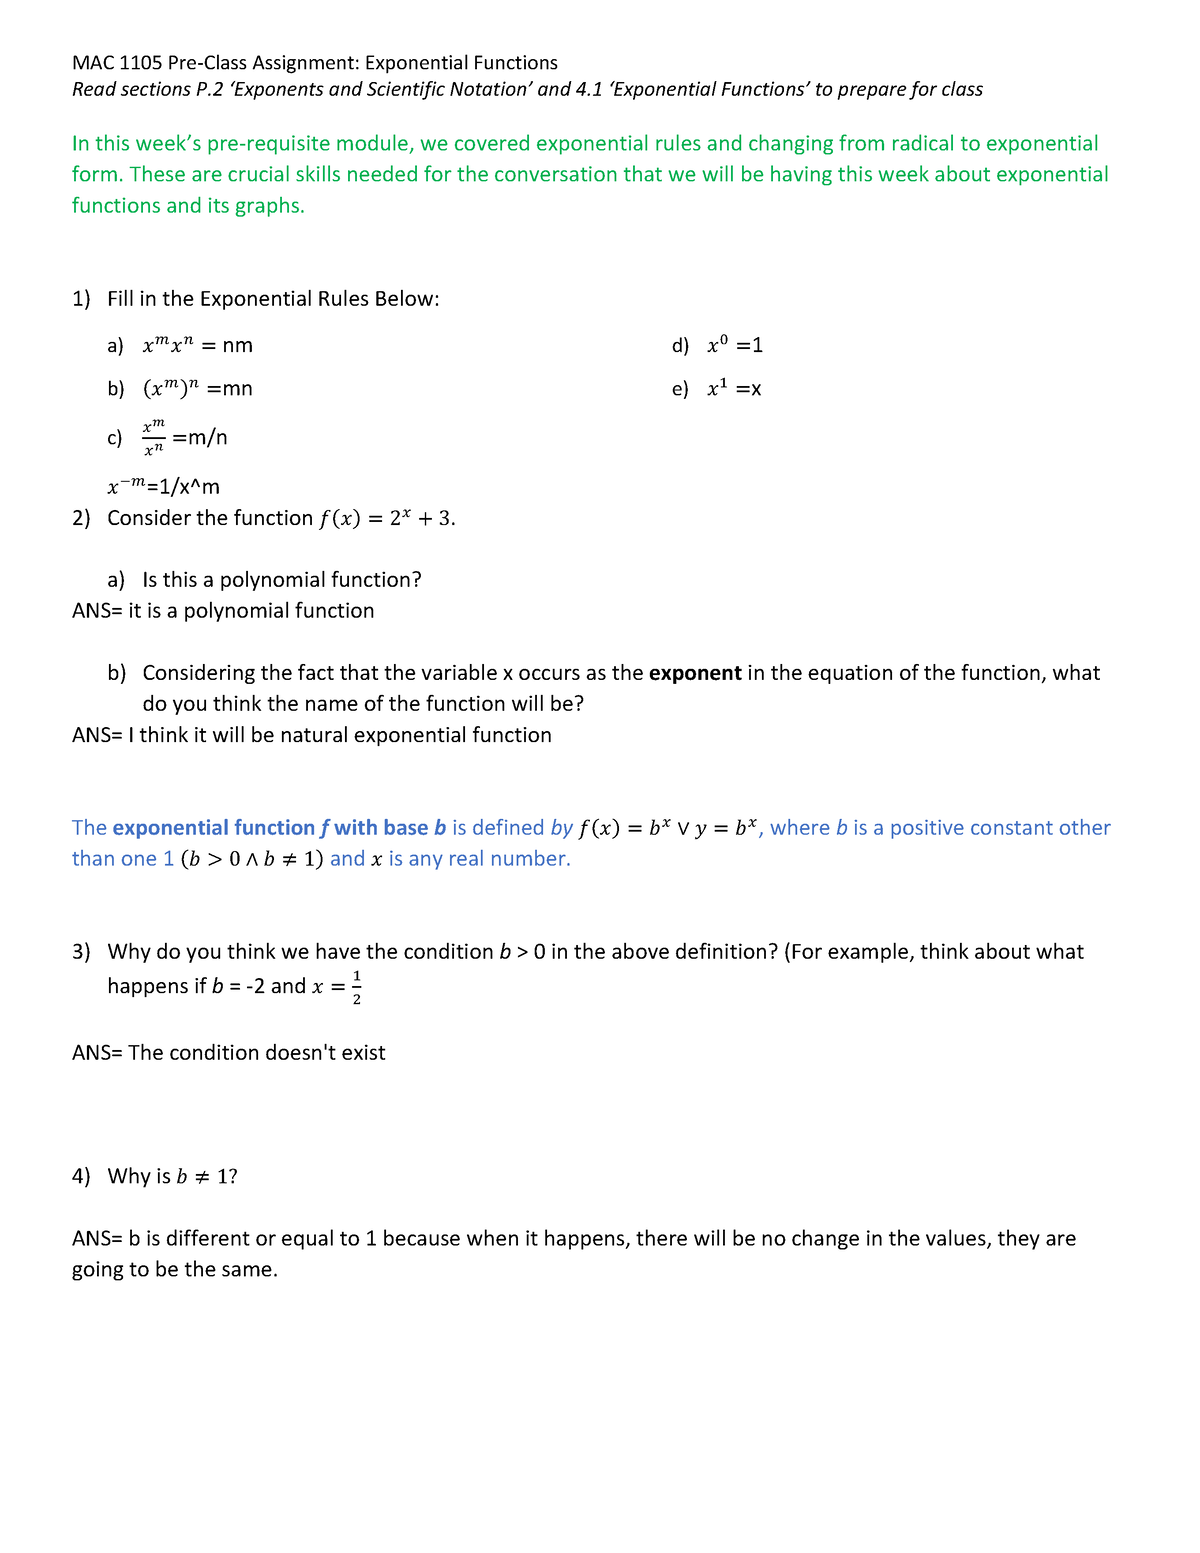 unit 7 corrective assignment exponential functions